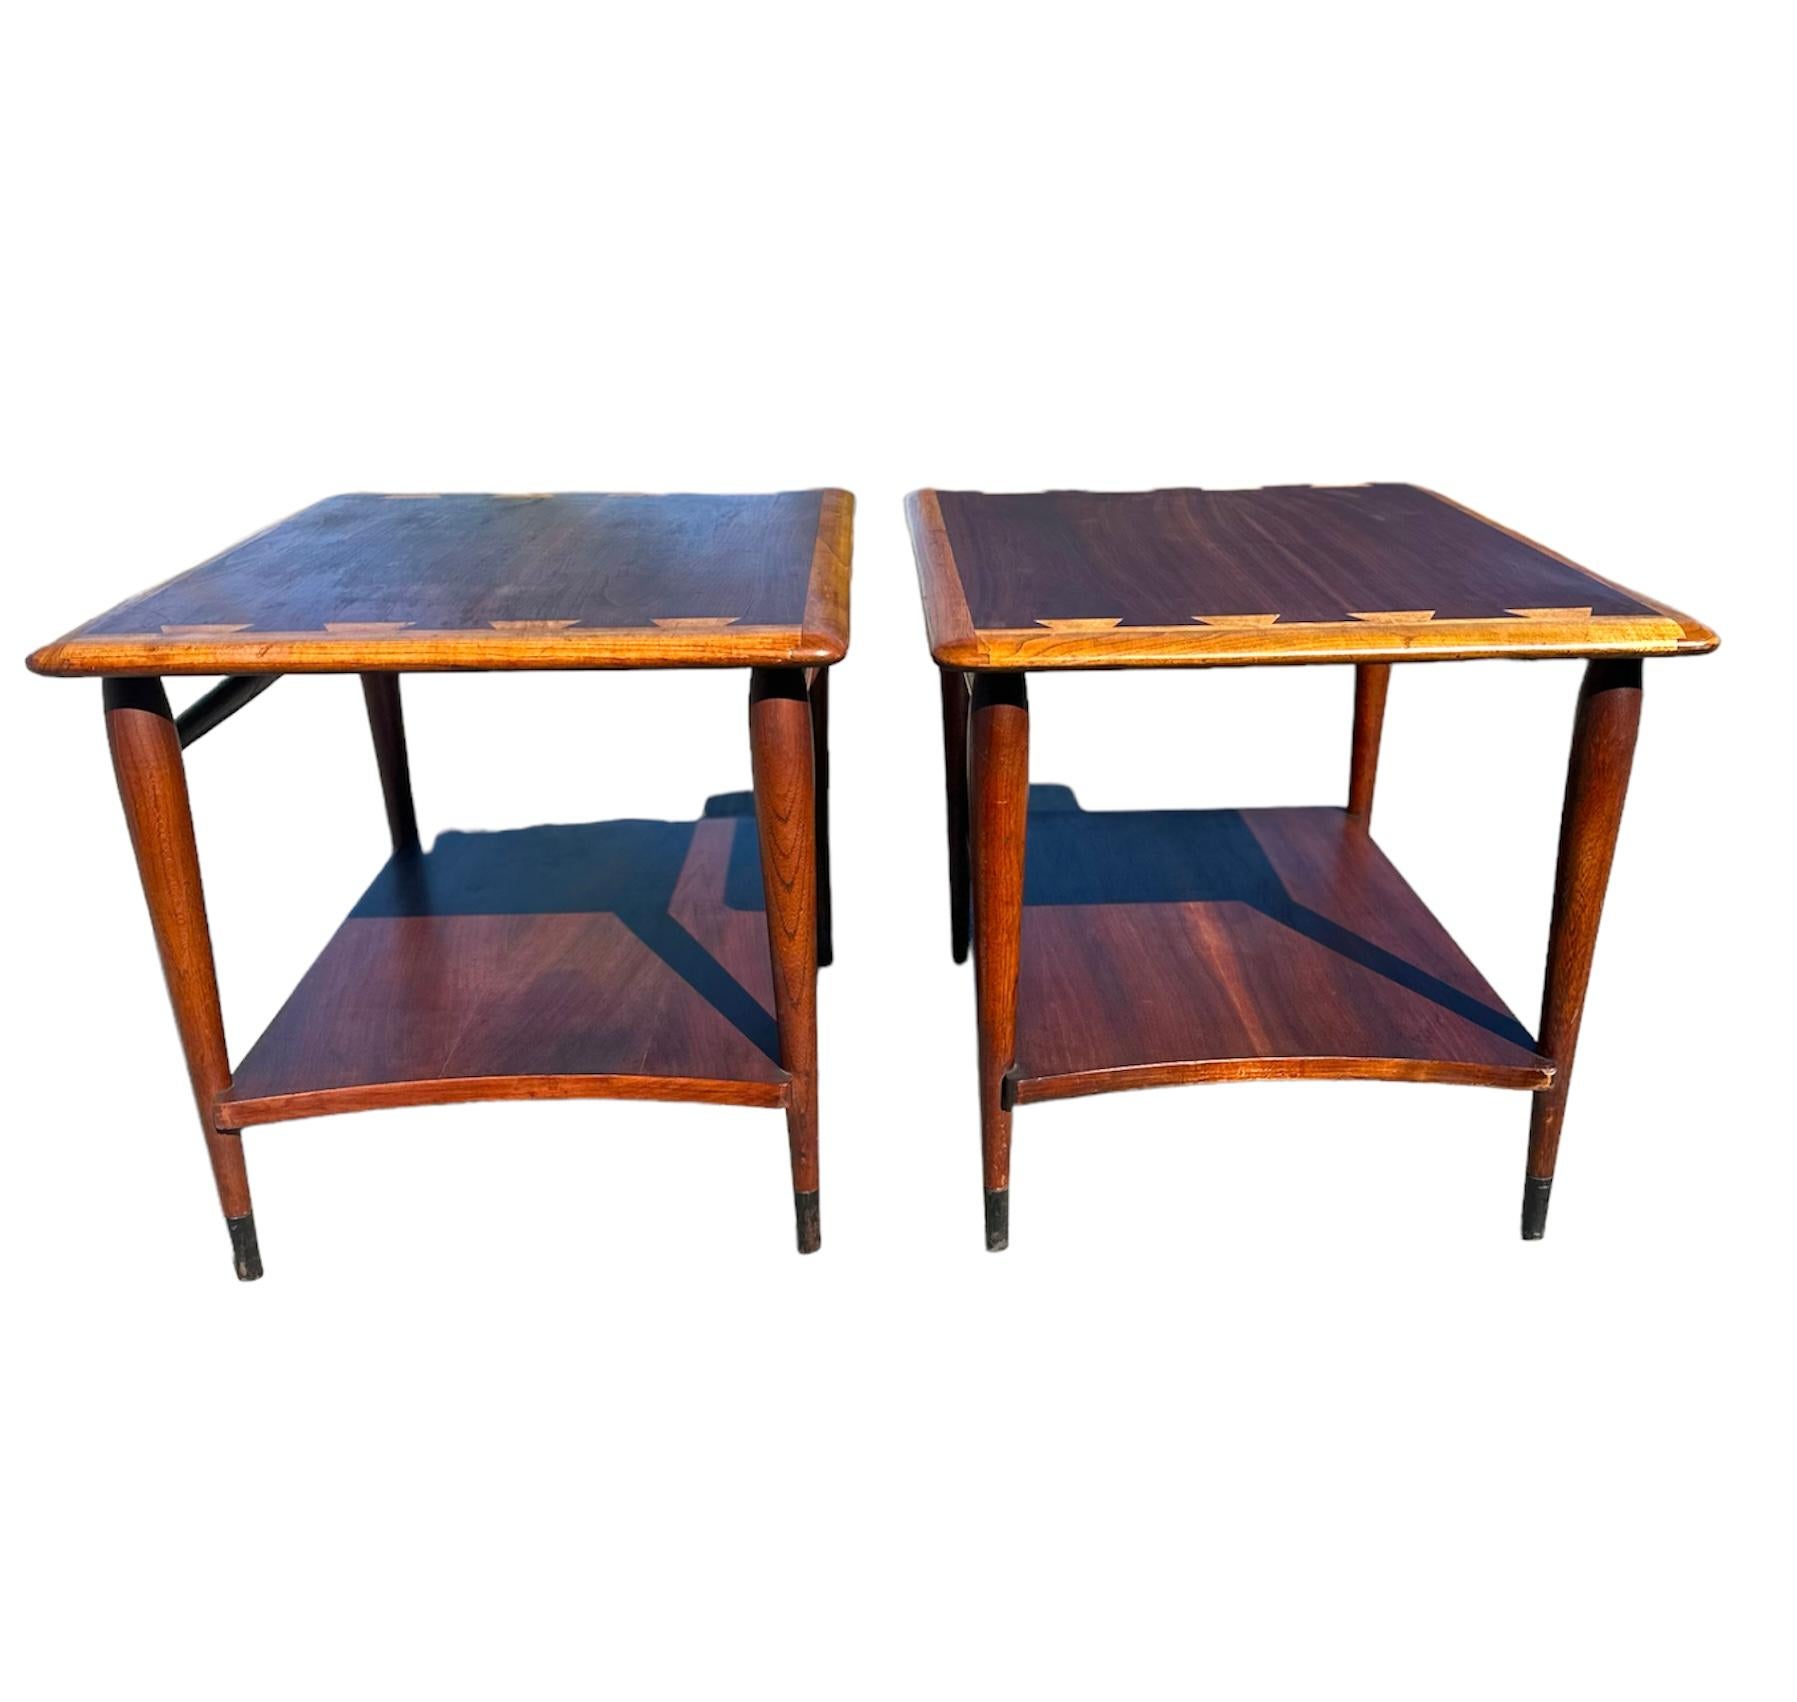 Mid Century Modern end tables by Andre Bus Model Number 900- 05. Very sturdy set and the dovetail makes for a fantastic two tone design feature., The legs are tapered and capped in metal.